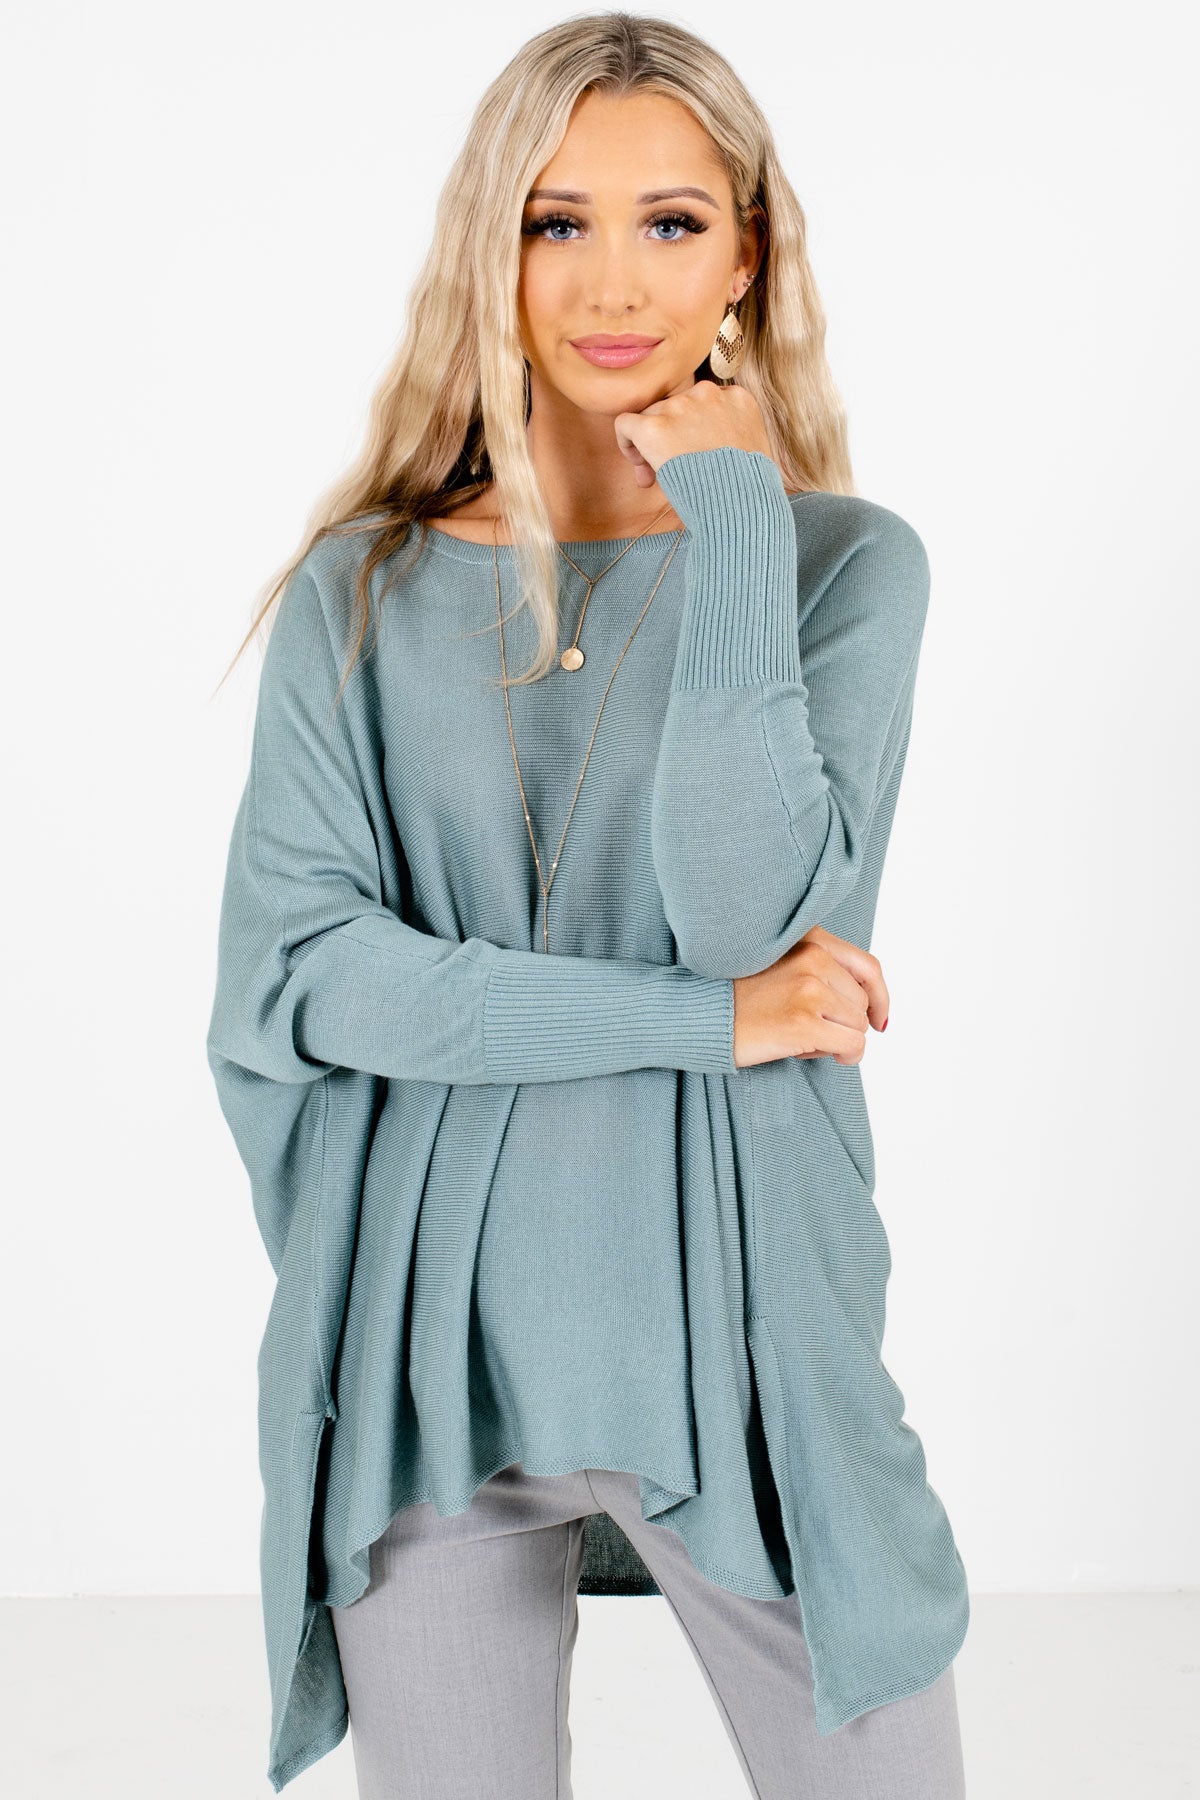 Women's Blue Spring and Summer Boutique Clothing